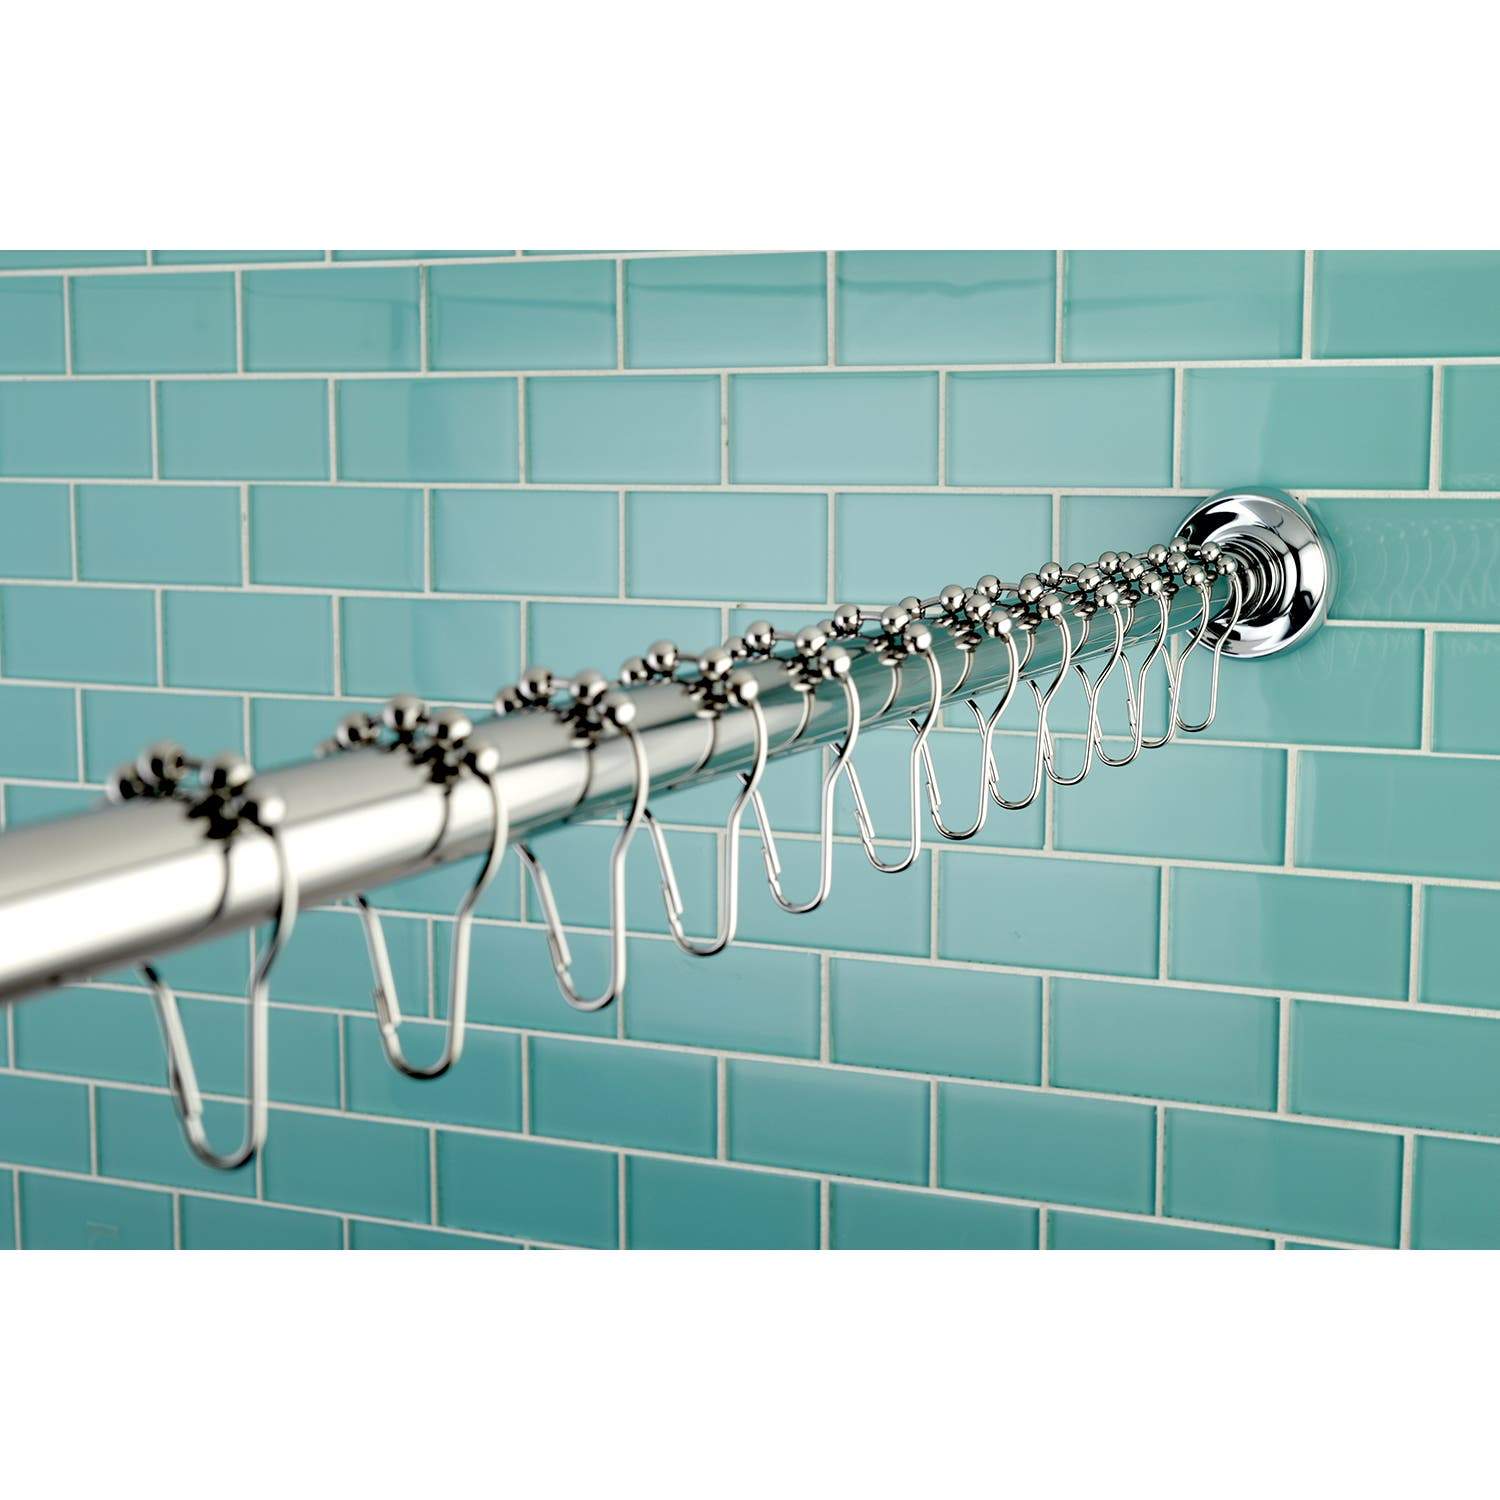 Kingston Brass Edenscape 72-Inch Adjustable Stainless Steel Shower Curtain Rod with Rings